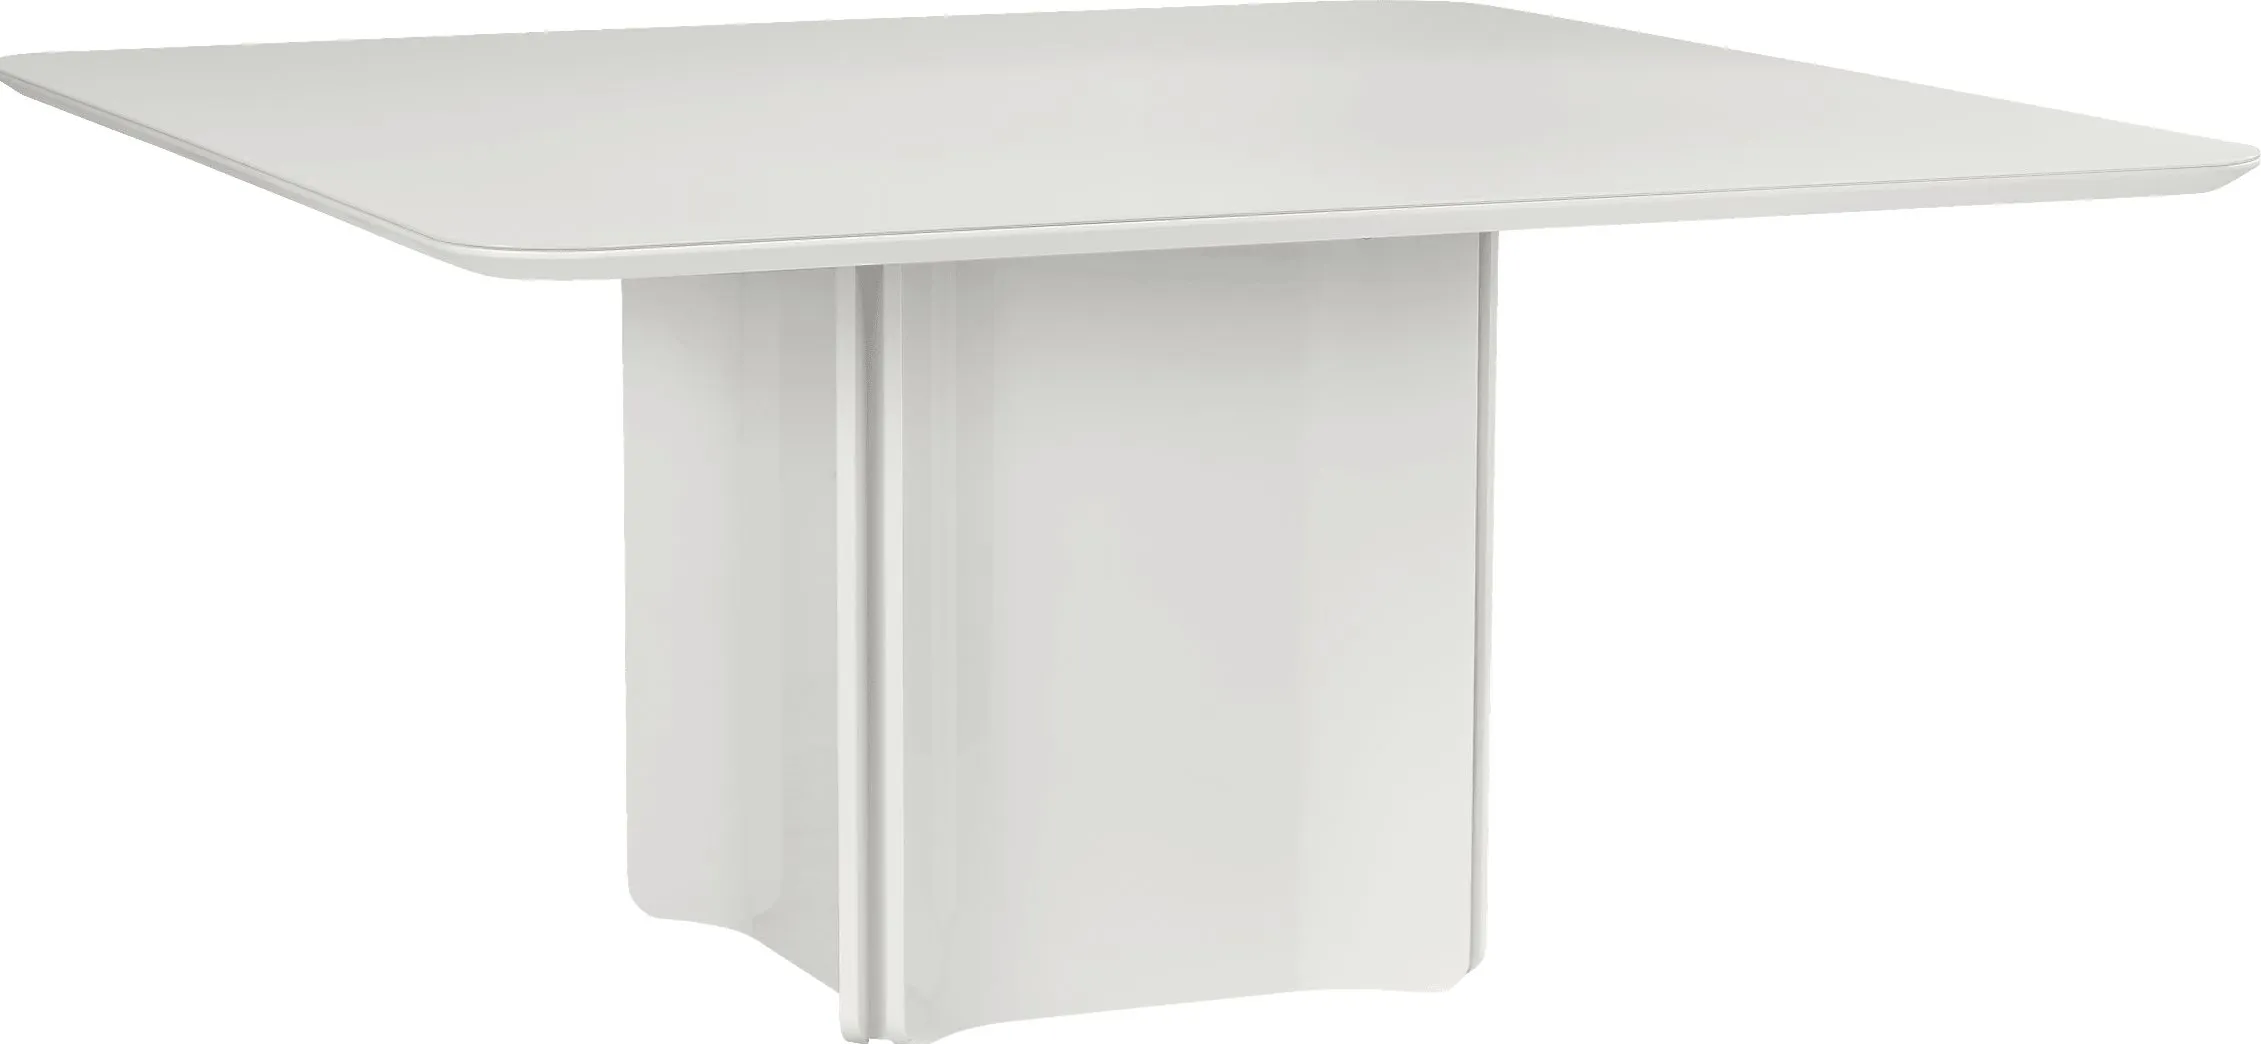 Tobian White Square Dining Table